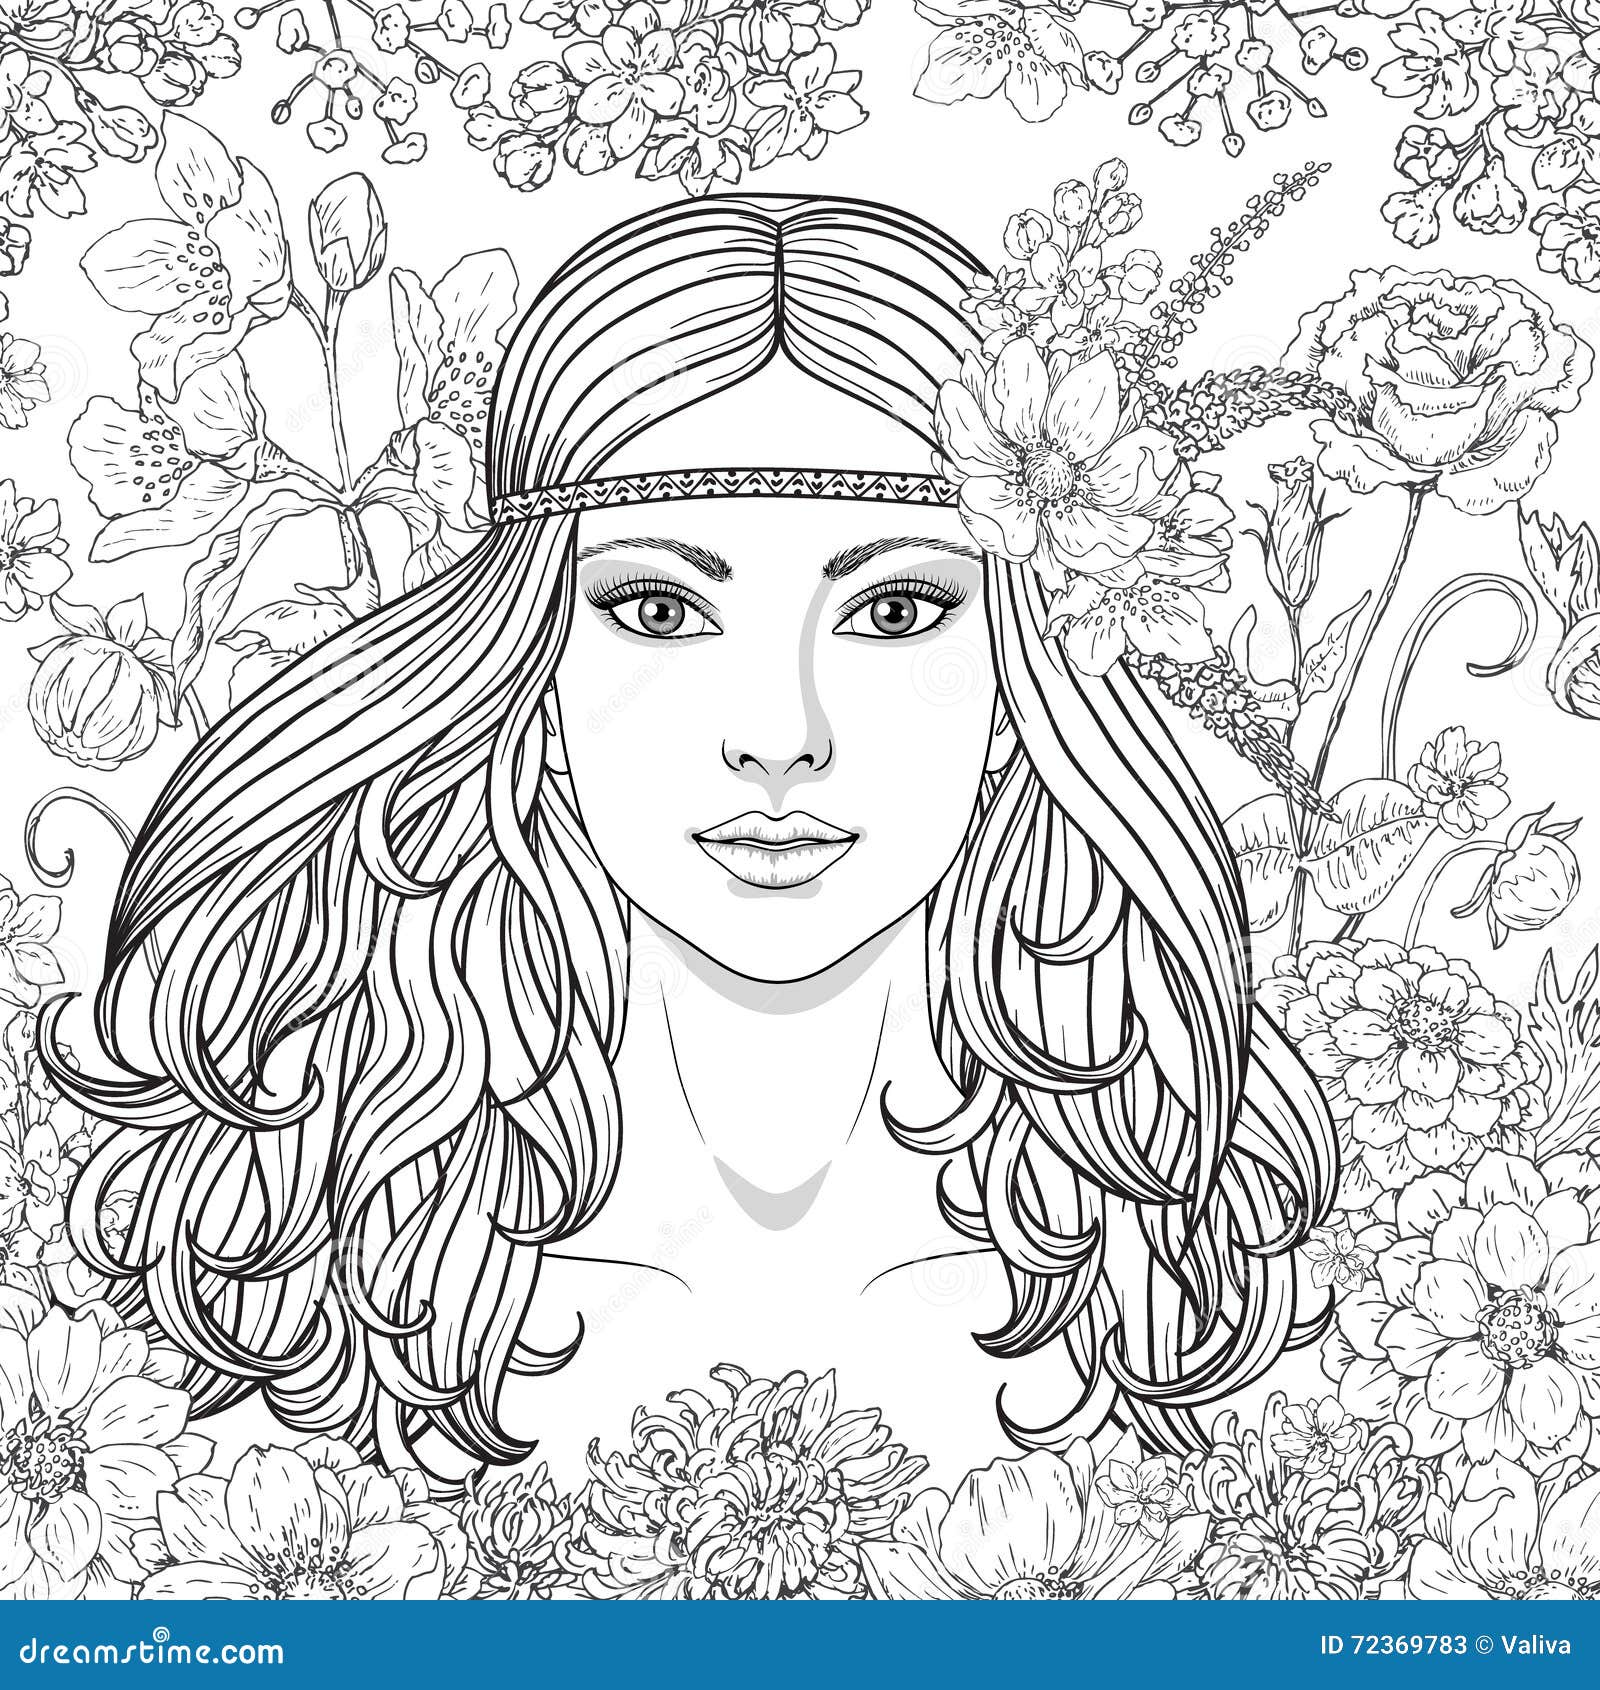 Beautiful Black Girl Coloring Pages